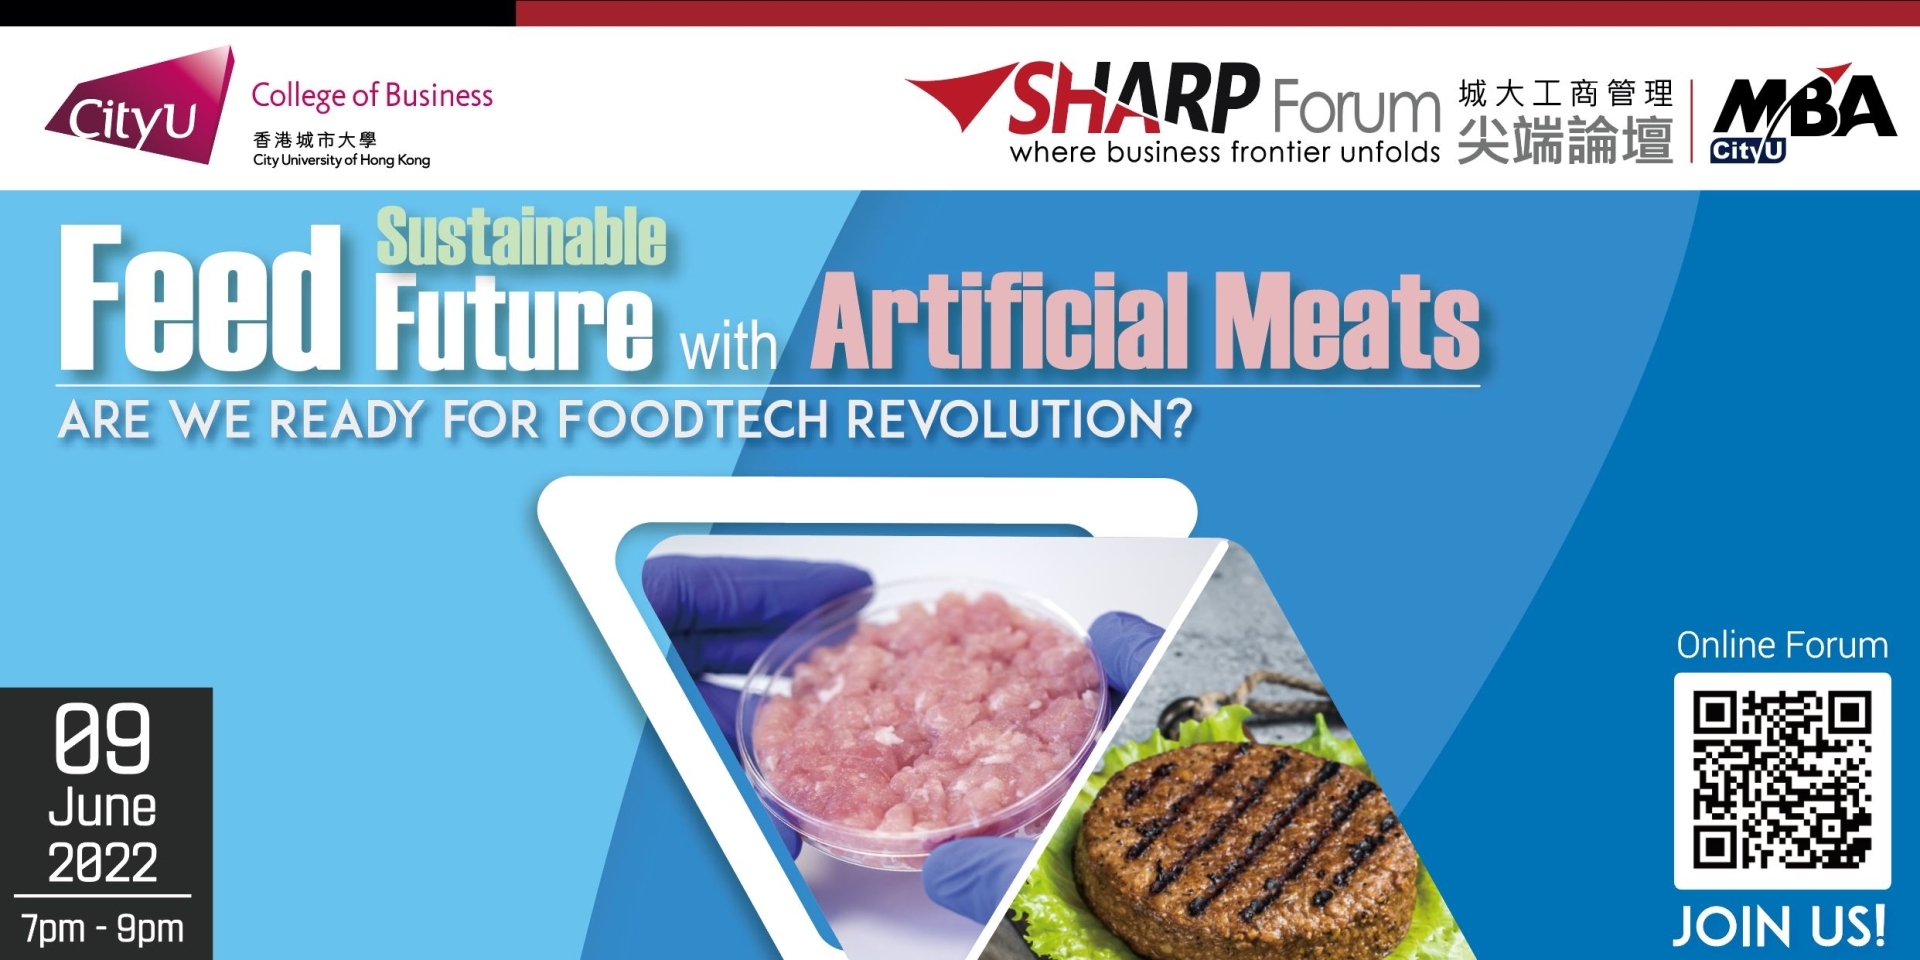 Artificial meat